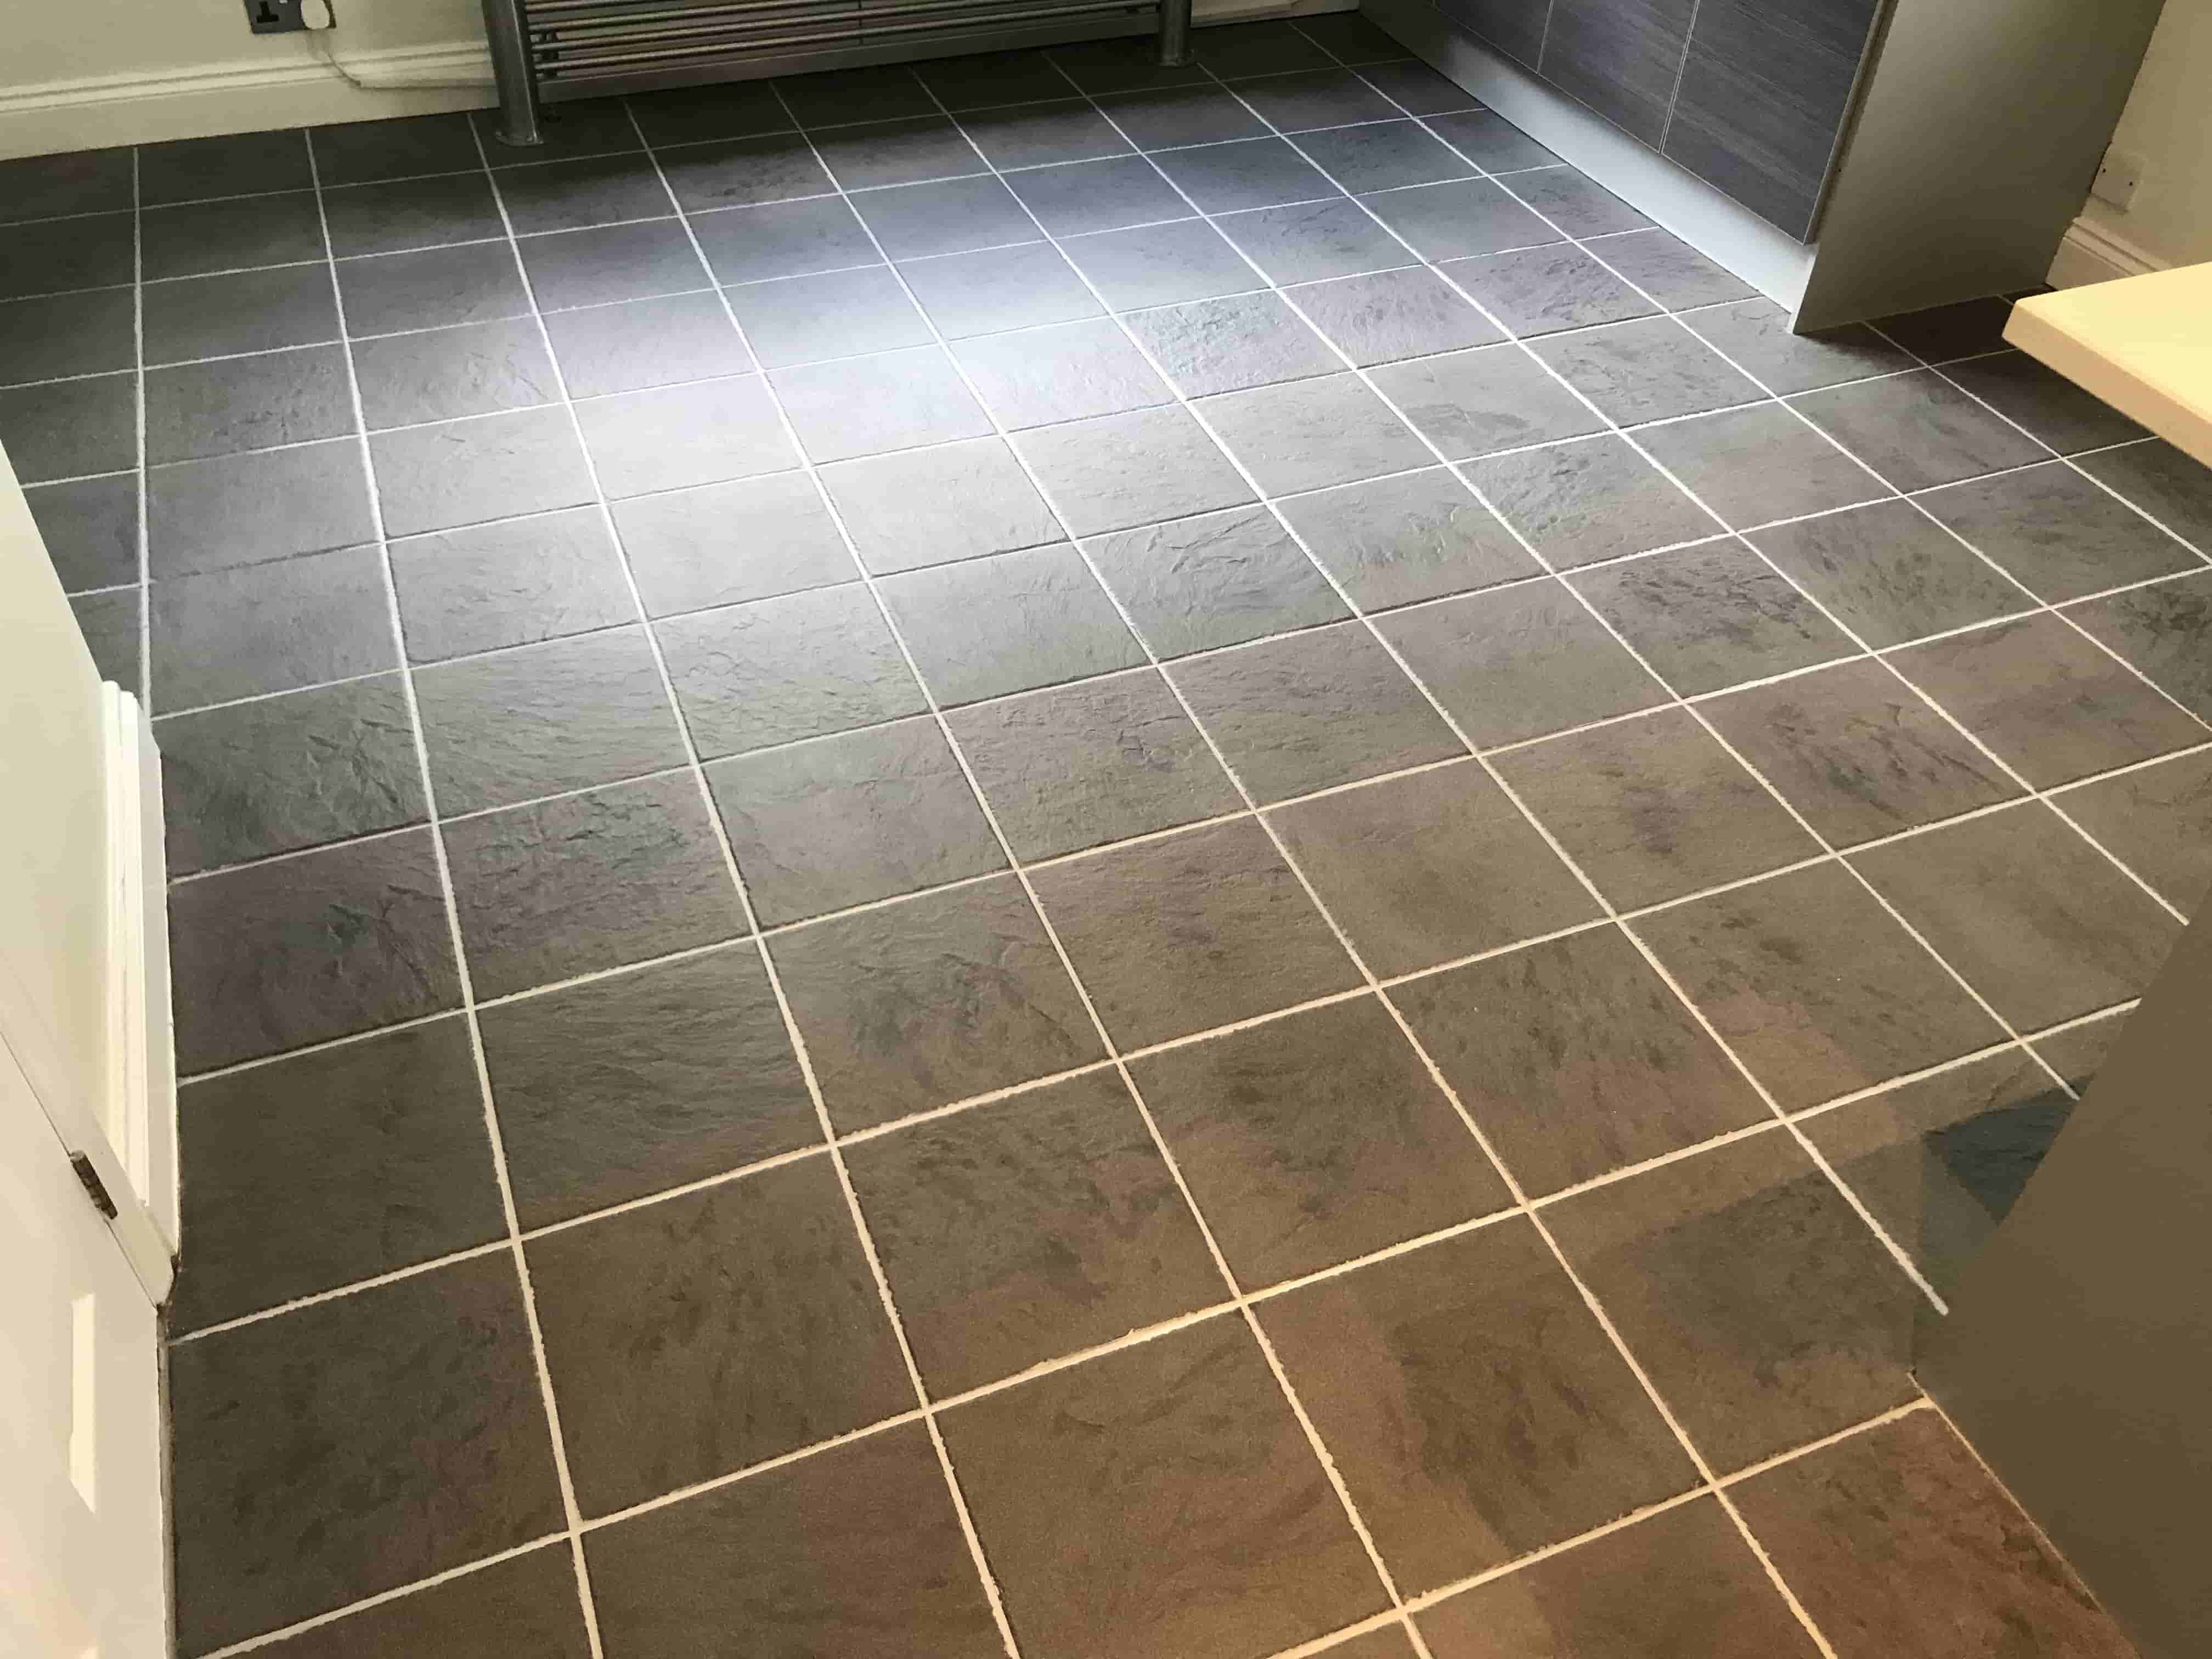 Ceramic Tiled Kitchen Floor Stained With Grout Haze After Cleaning Sandhurst